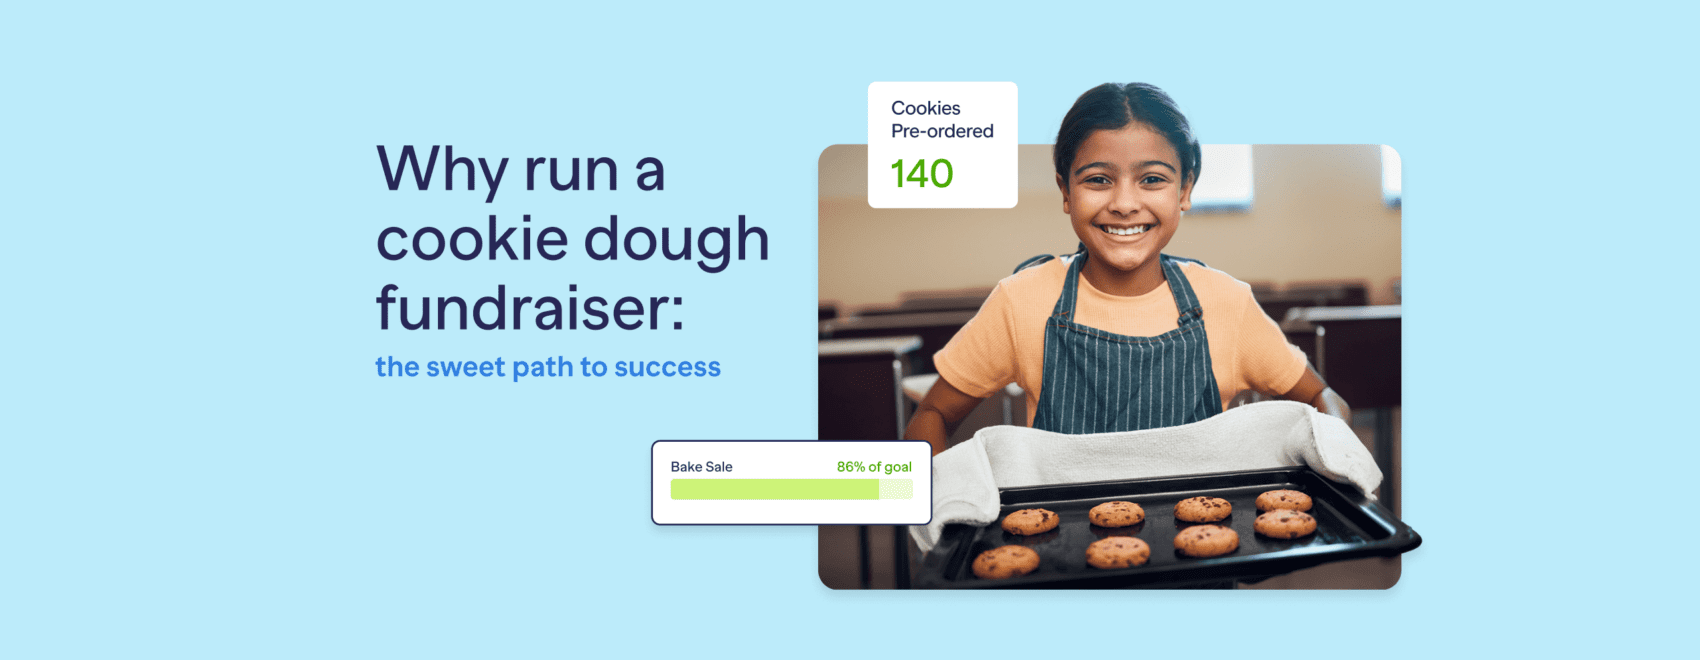 Why run a cookie dough fundraiser the sweet path to success